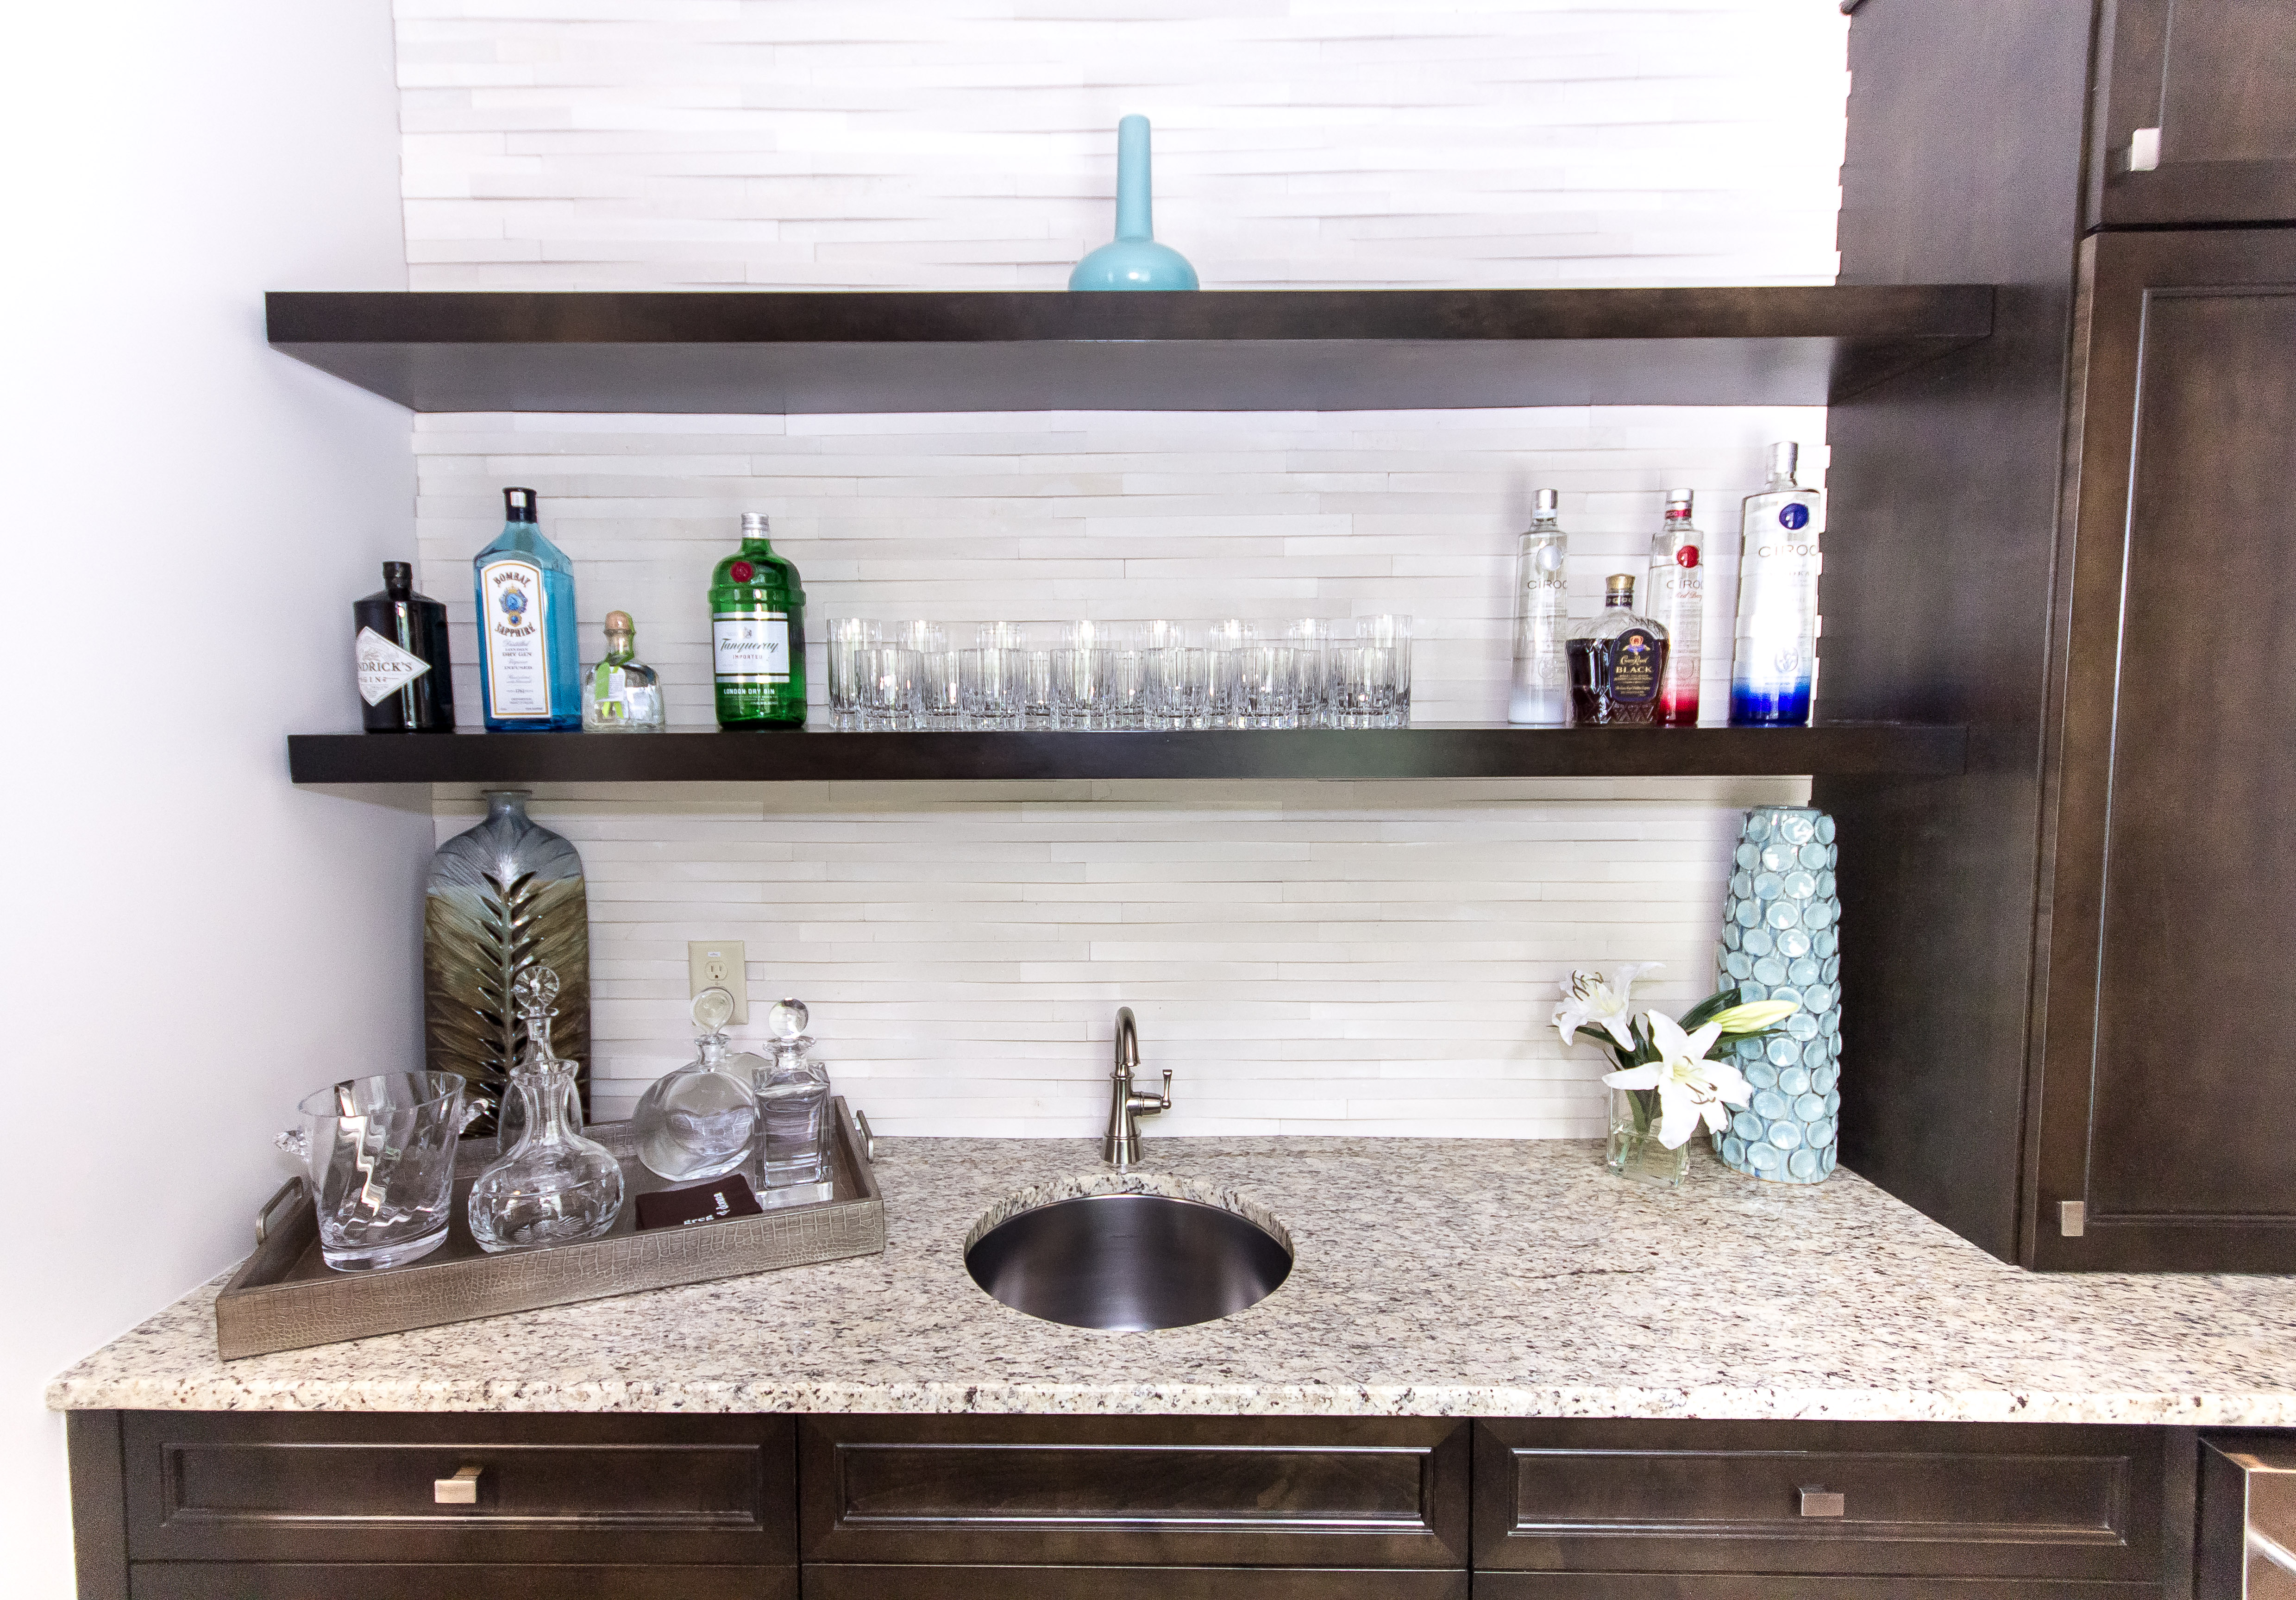 friedman wet bar basement floating shelves marietta this was part full remodel includes custom cabinetry quartz countertops and tile pull out simple wood for garage eames shelving